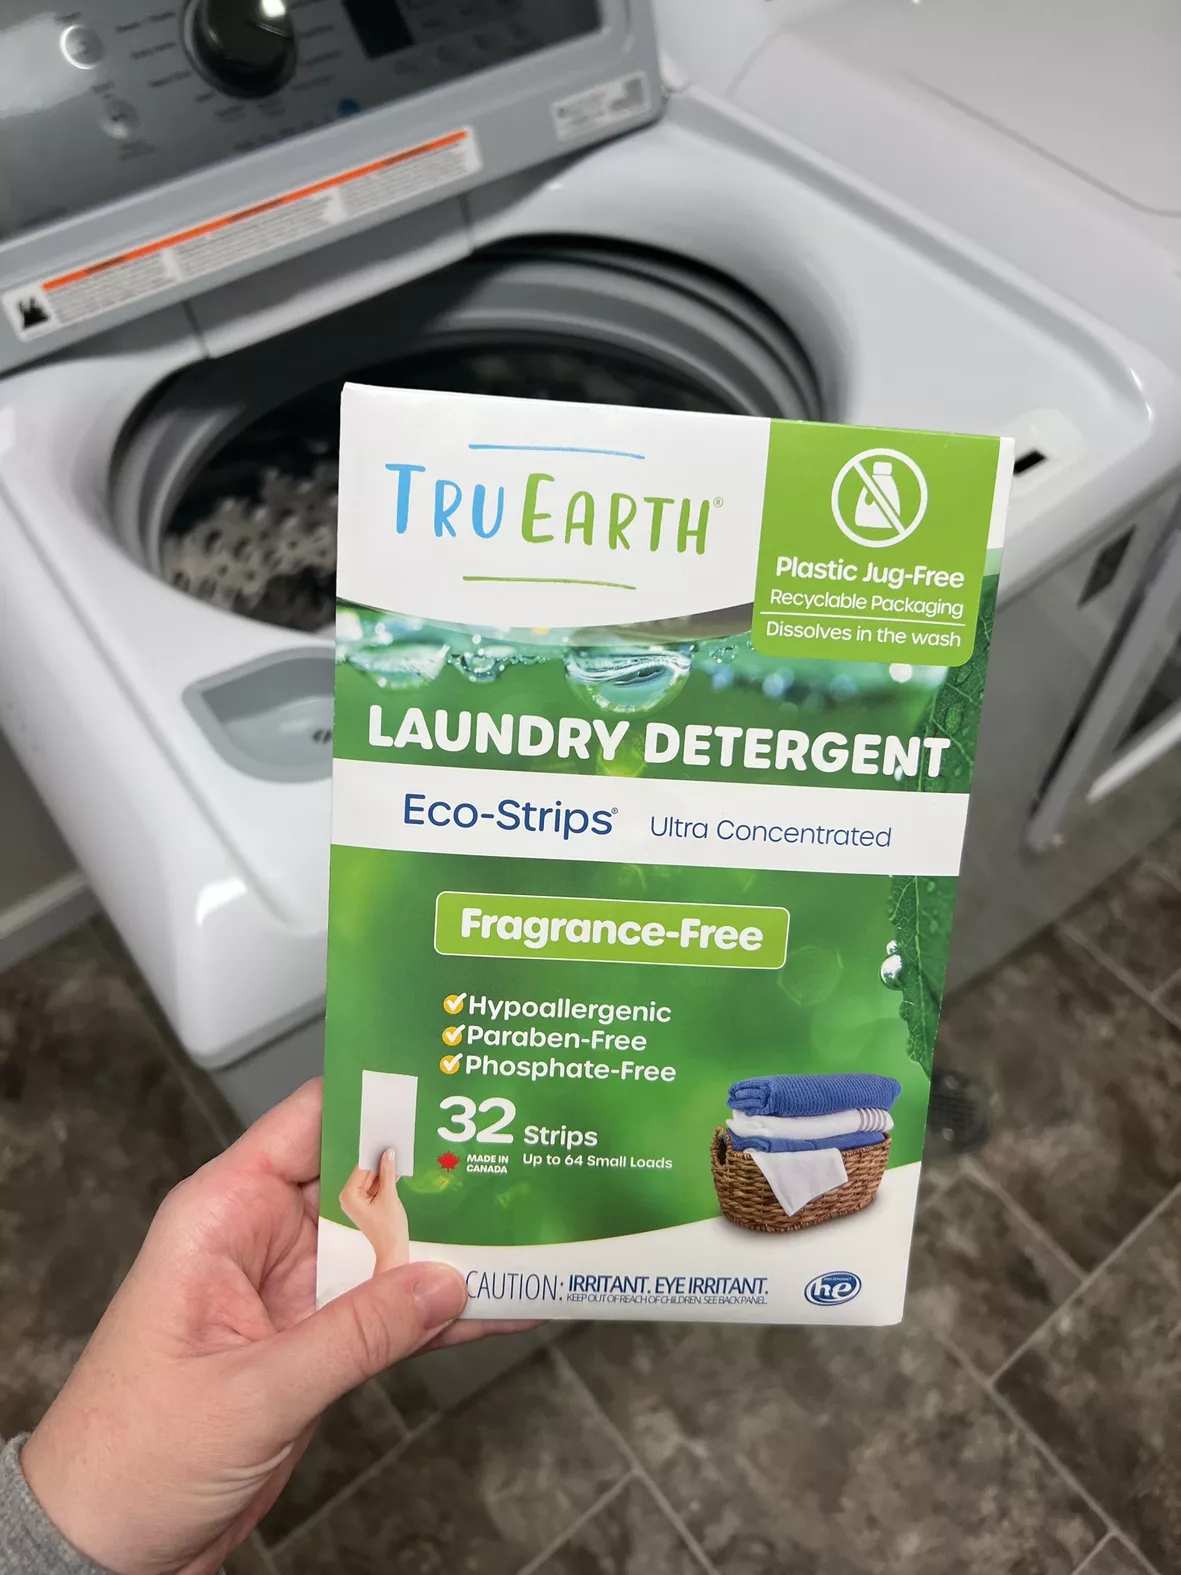 Tru Earth Compact Dry Laundry Detergent Sheets, Unscented - Up to